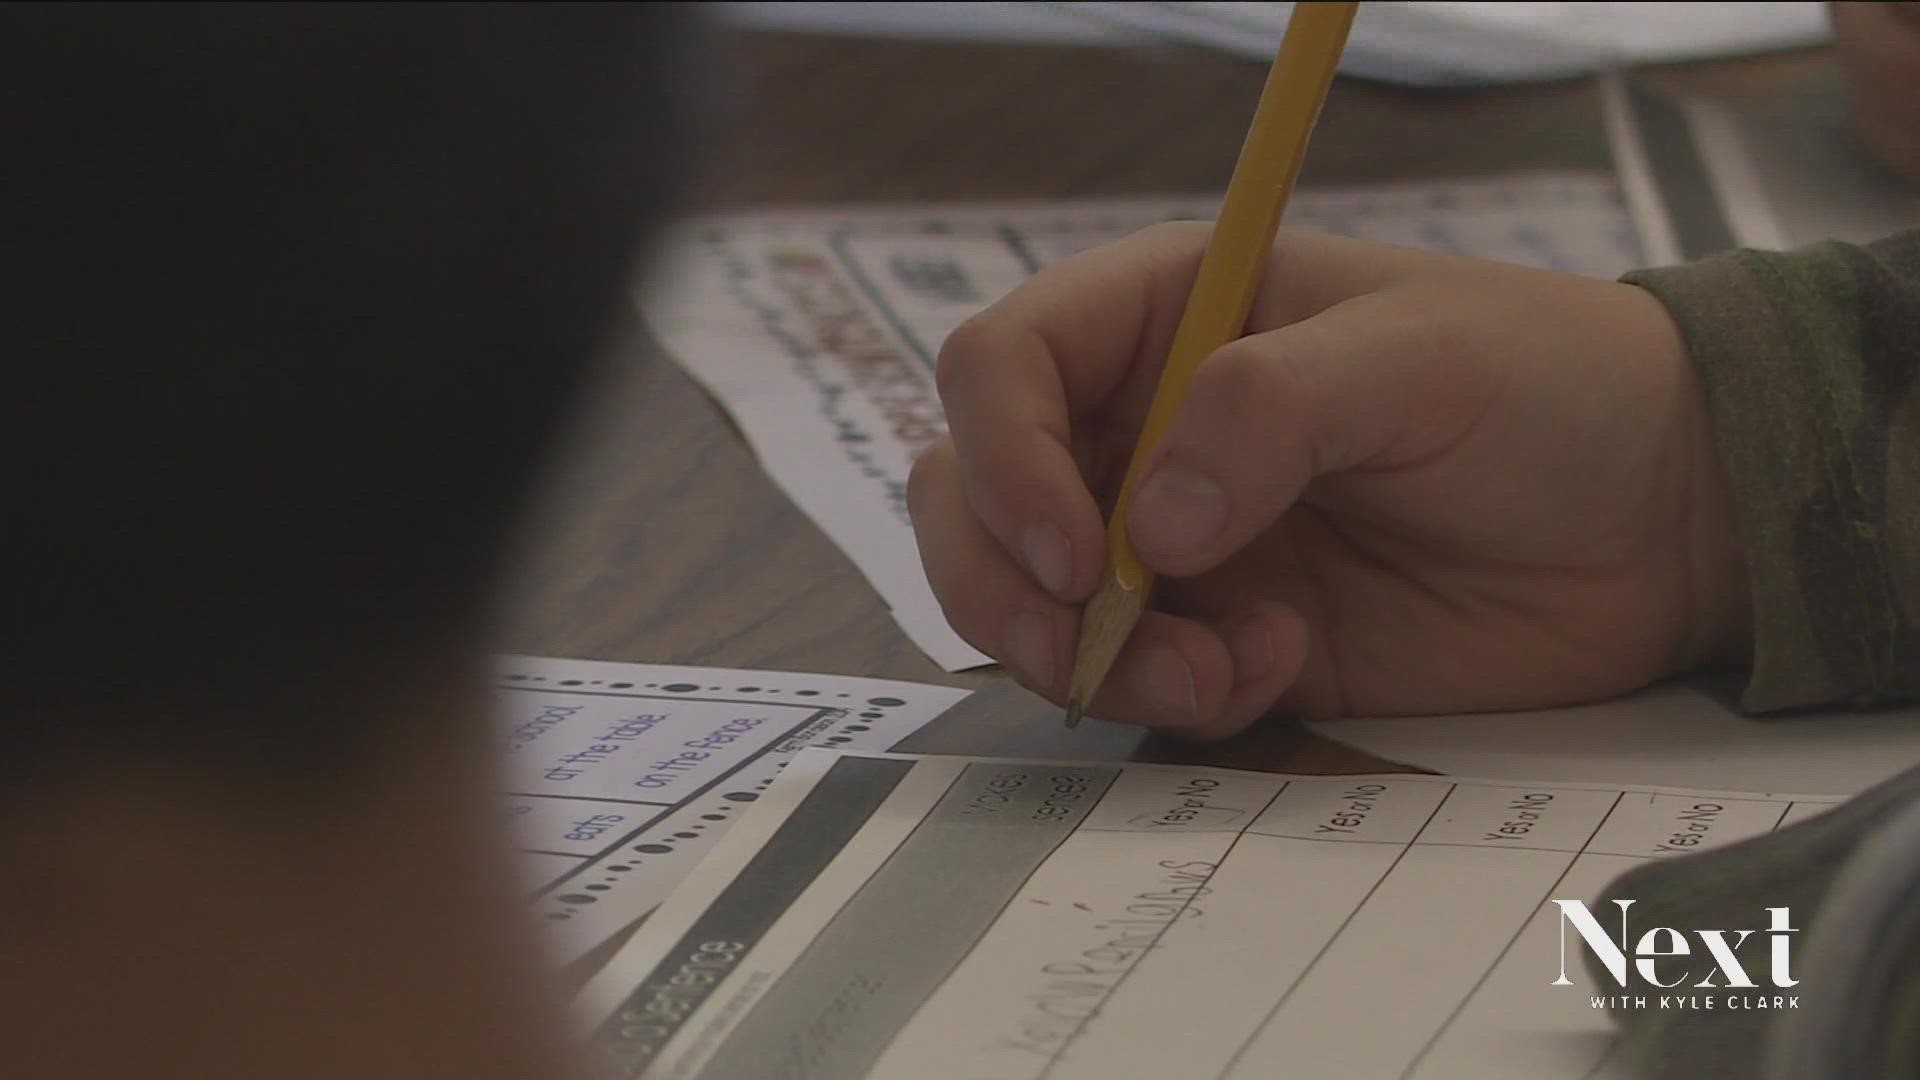 Math proficiency for fourth and eighth graders in Colorado is each down nearly double digits. Teachers are implementing more small-group strategies to close the gap.